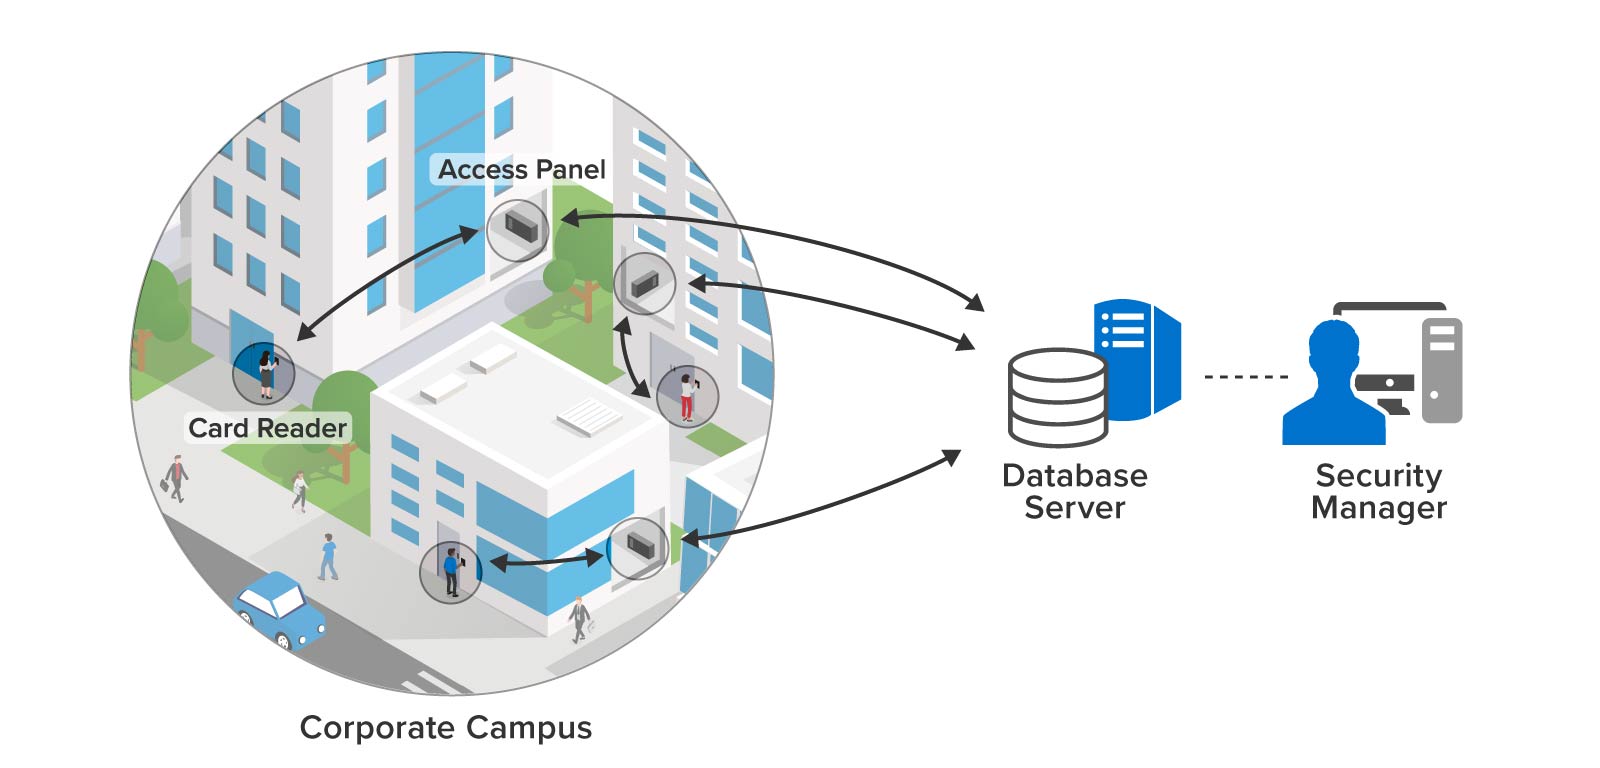 Key card access control on a corporate campus using a database